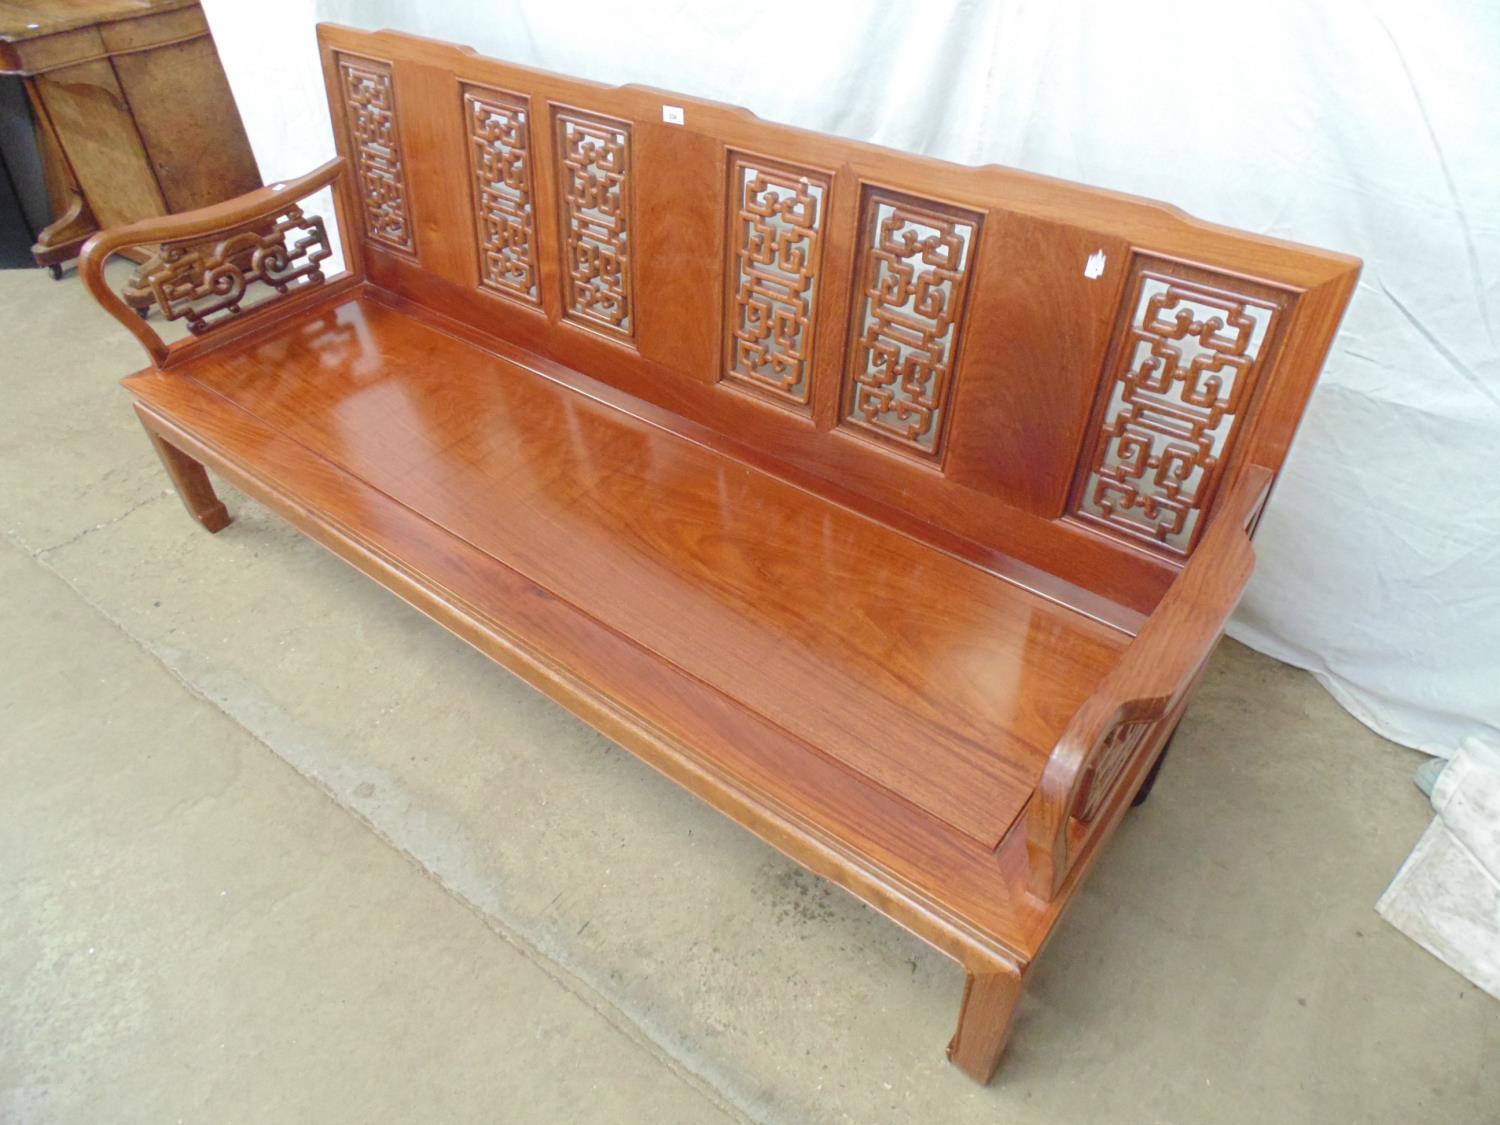 20th century Chinese hardwood bench having pierced back and arms, solid seat and standing on - Image 2 of 5